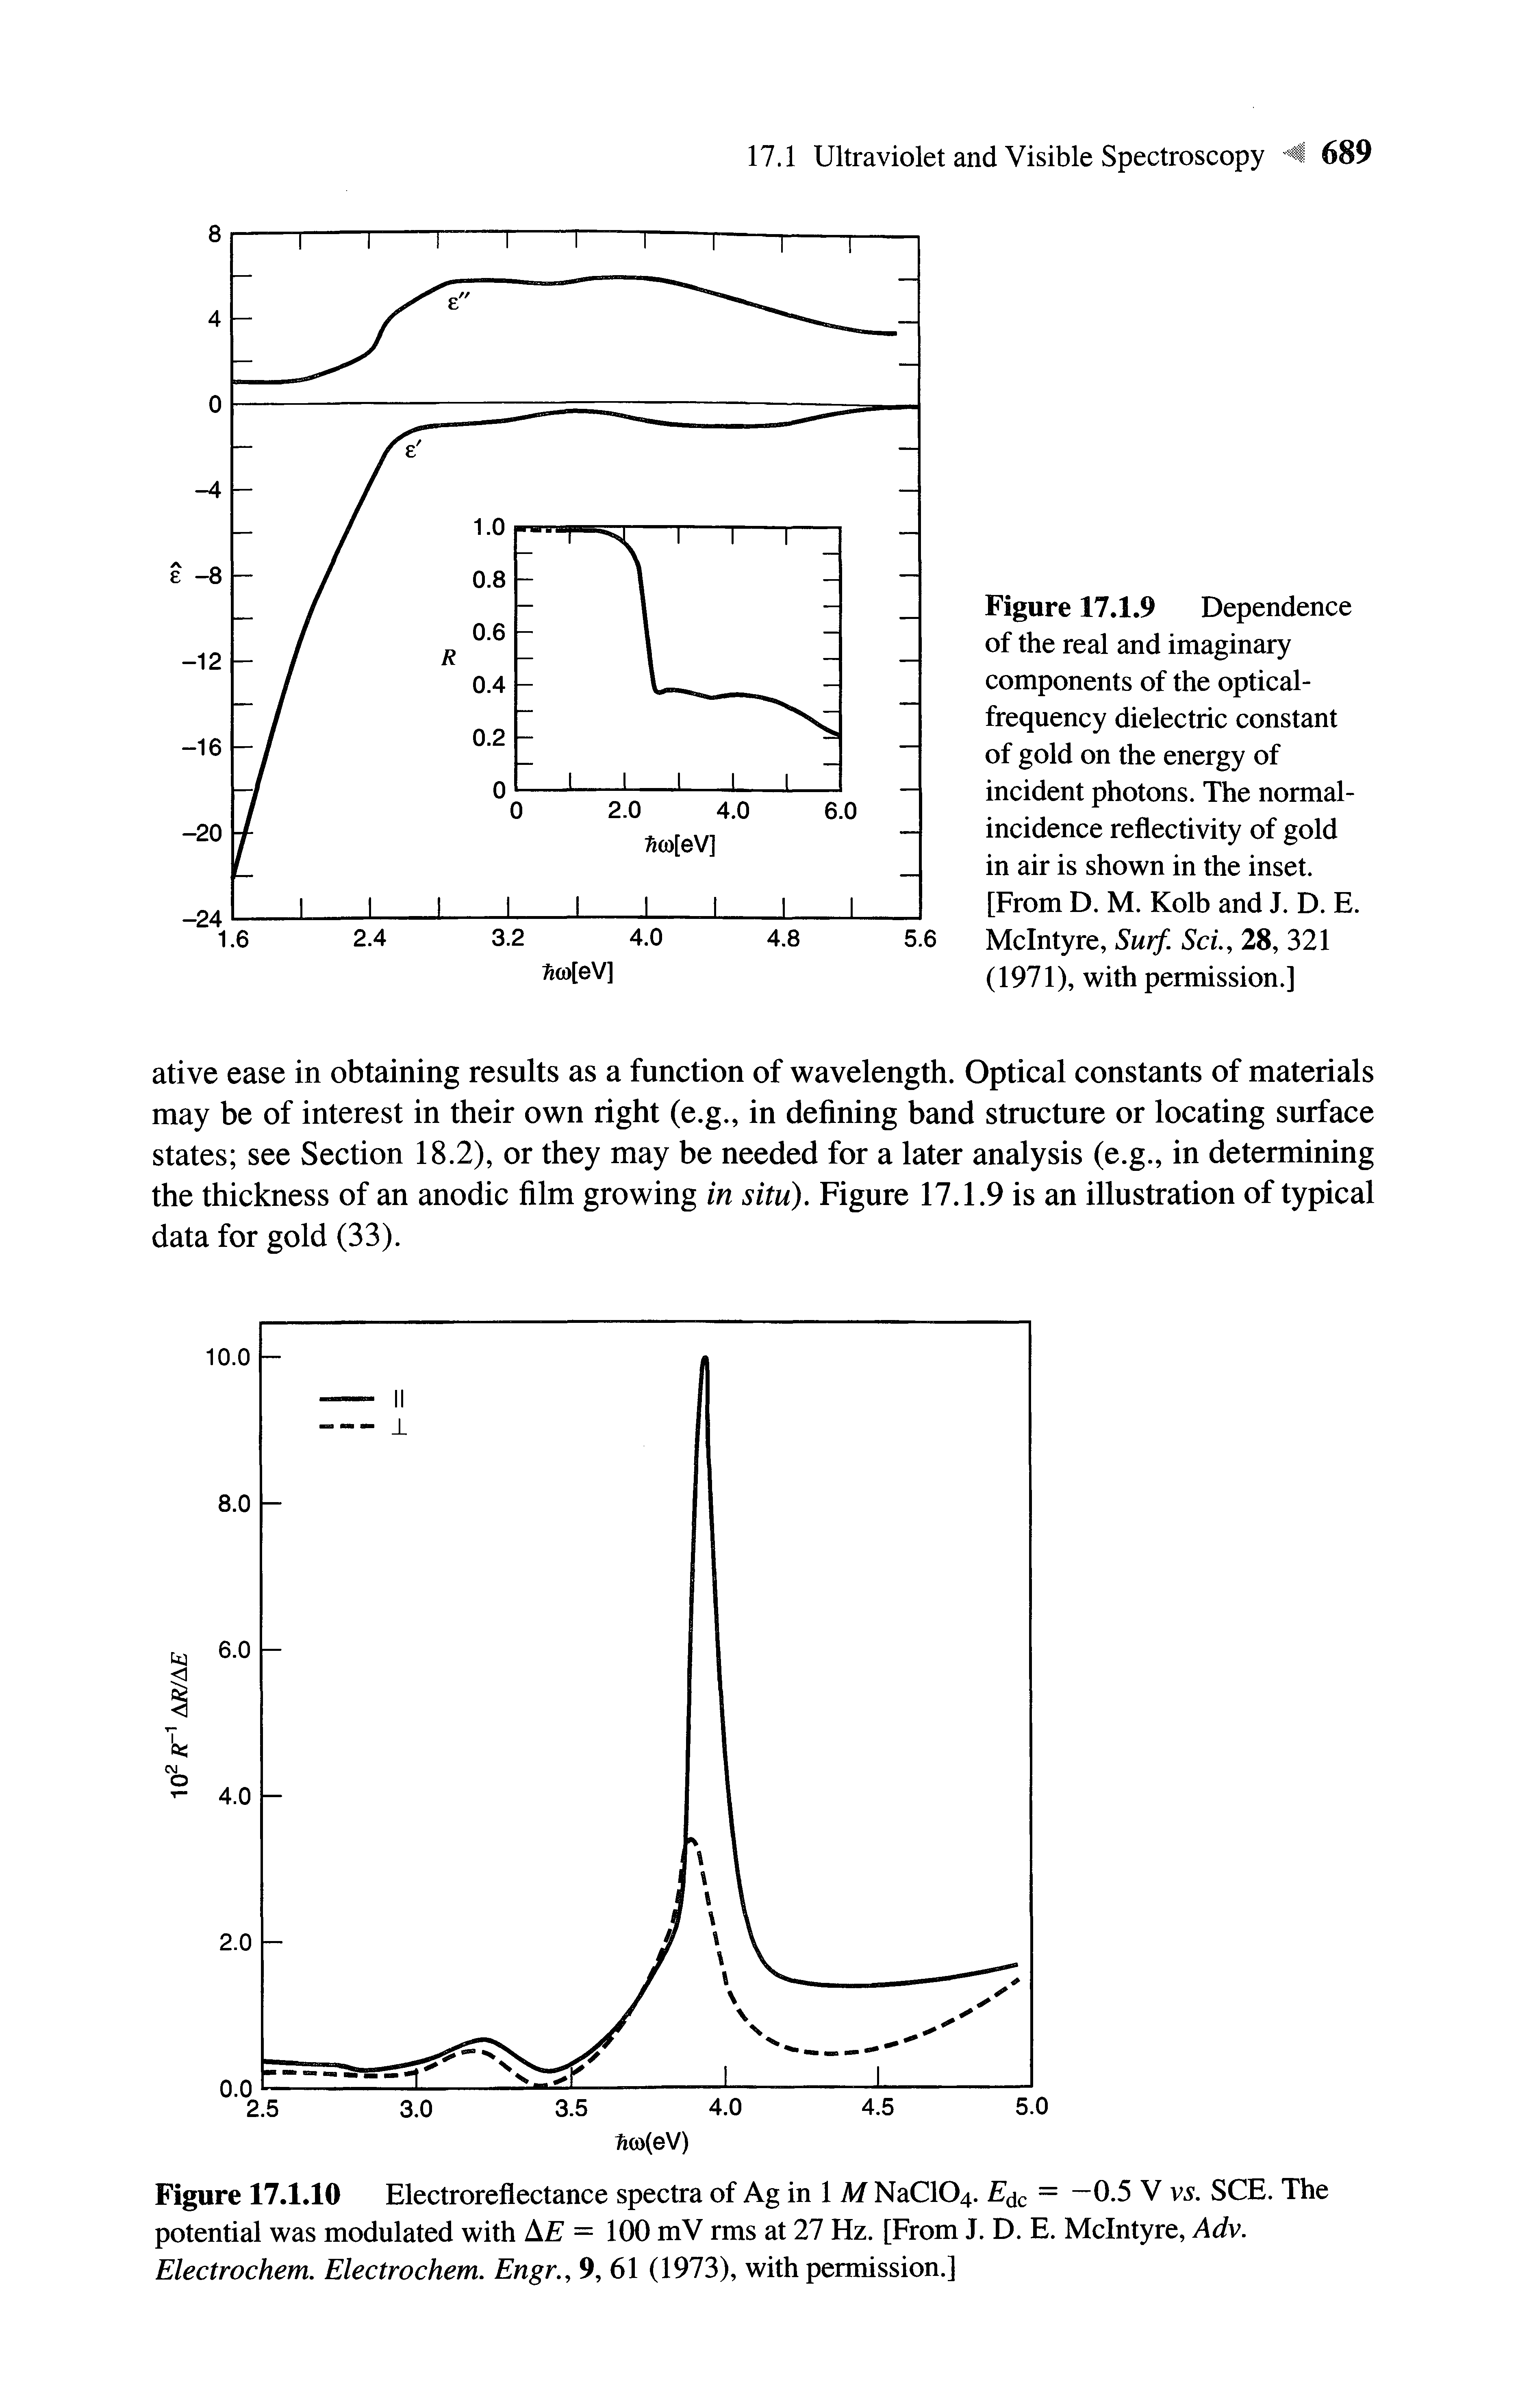 Figure 17.1.9 Dependence of the real and imaginary components of the optical-frequency dielectric constant of gold on the energy of incident photons. The normal-incidence reflectivity of gold in air is shown in the inset. [From D. M. Kolb and J. D. E. McIntyre, Surf. ScL, 28, 321 (1971), with permission.]...